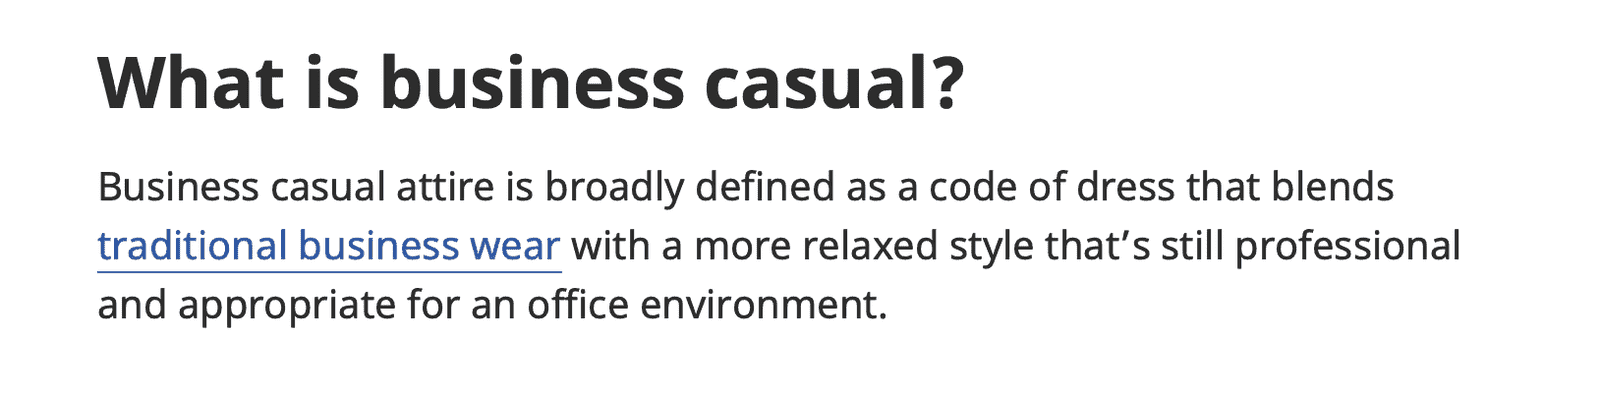 Business casual dress code definition